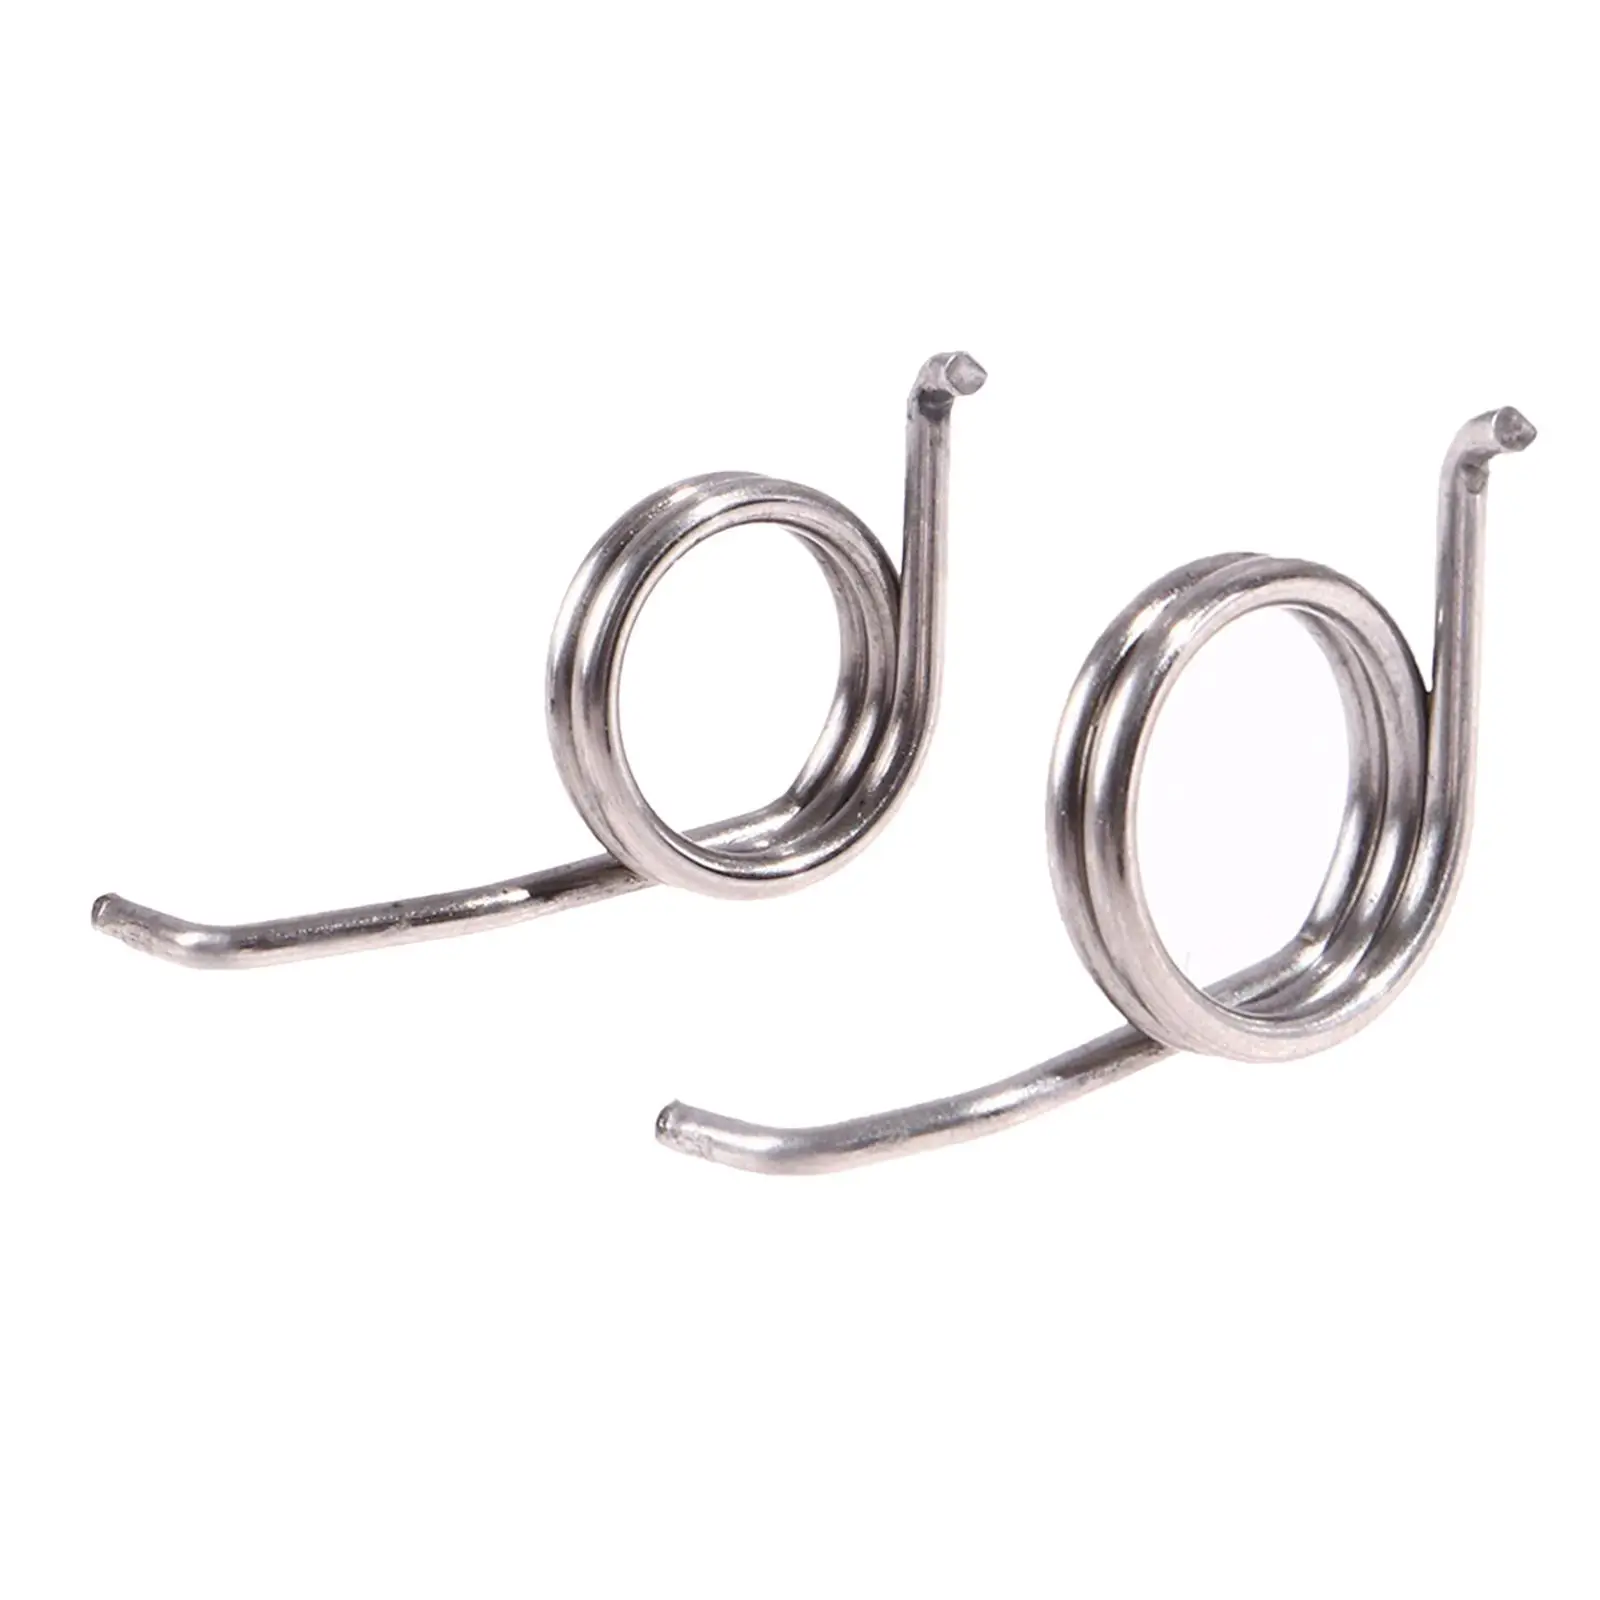 Baits Casting Water Drop Wheel Spring Modified Tool 1Pcs Bail Spring Stainless Steel Tool Kit Spare Parts Small Torsion Spring